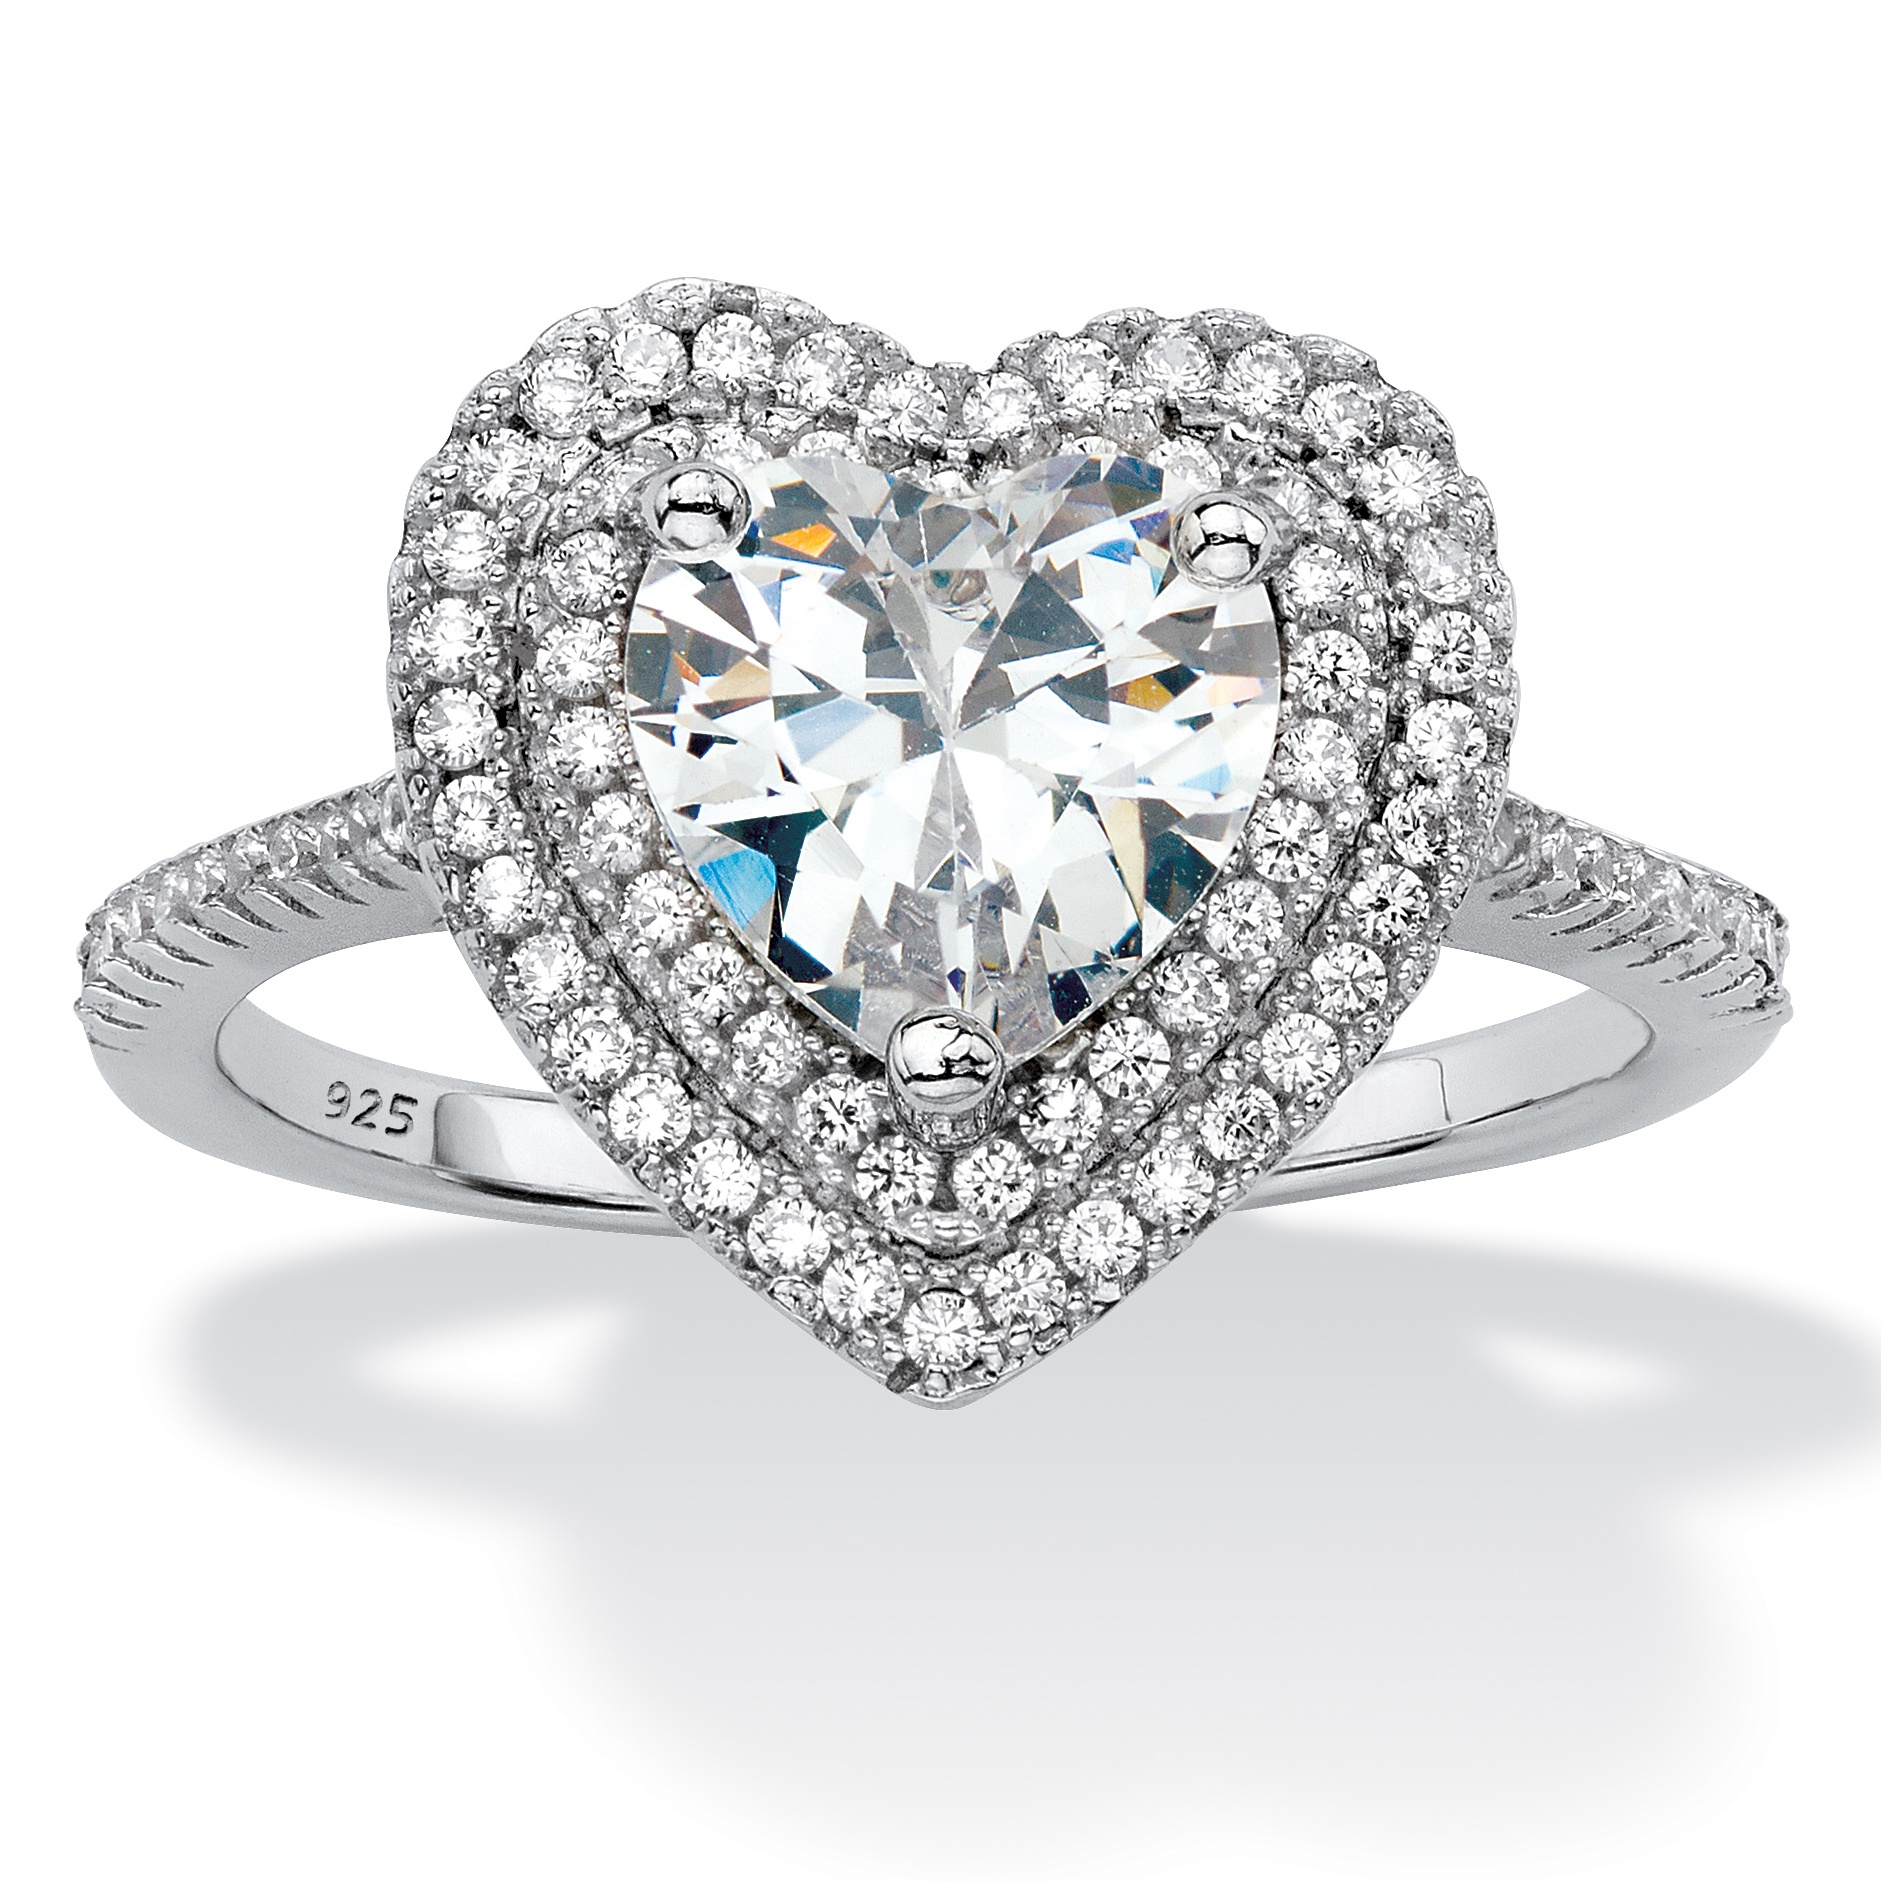 Heart Shaped Cubic Zirconia Halo Engagement Ring 1.48 TCW in Platinum ...